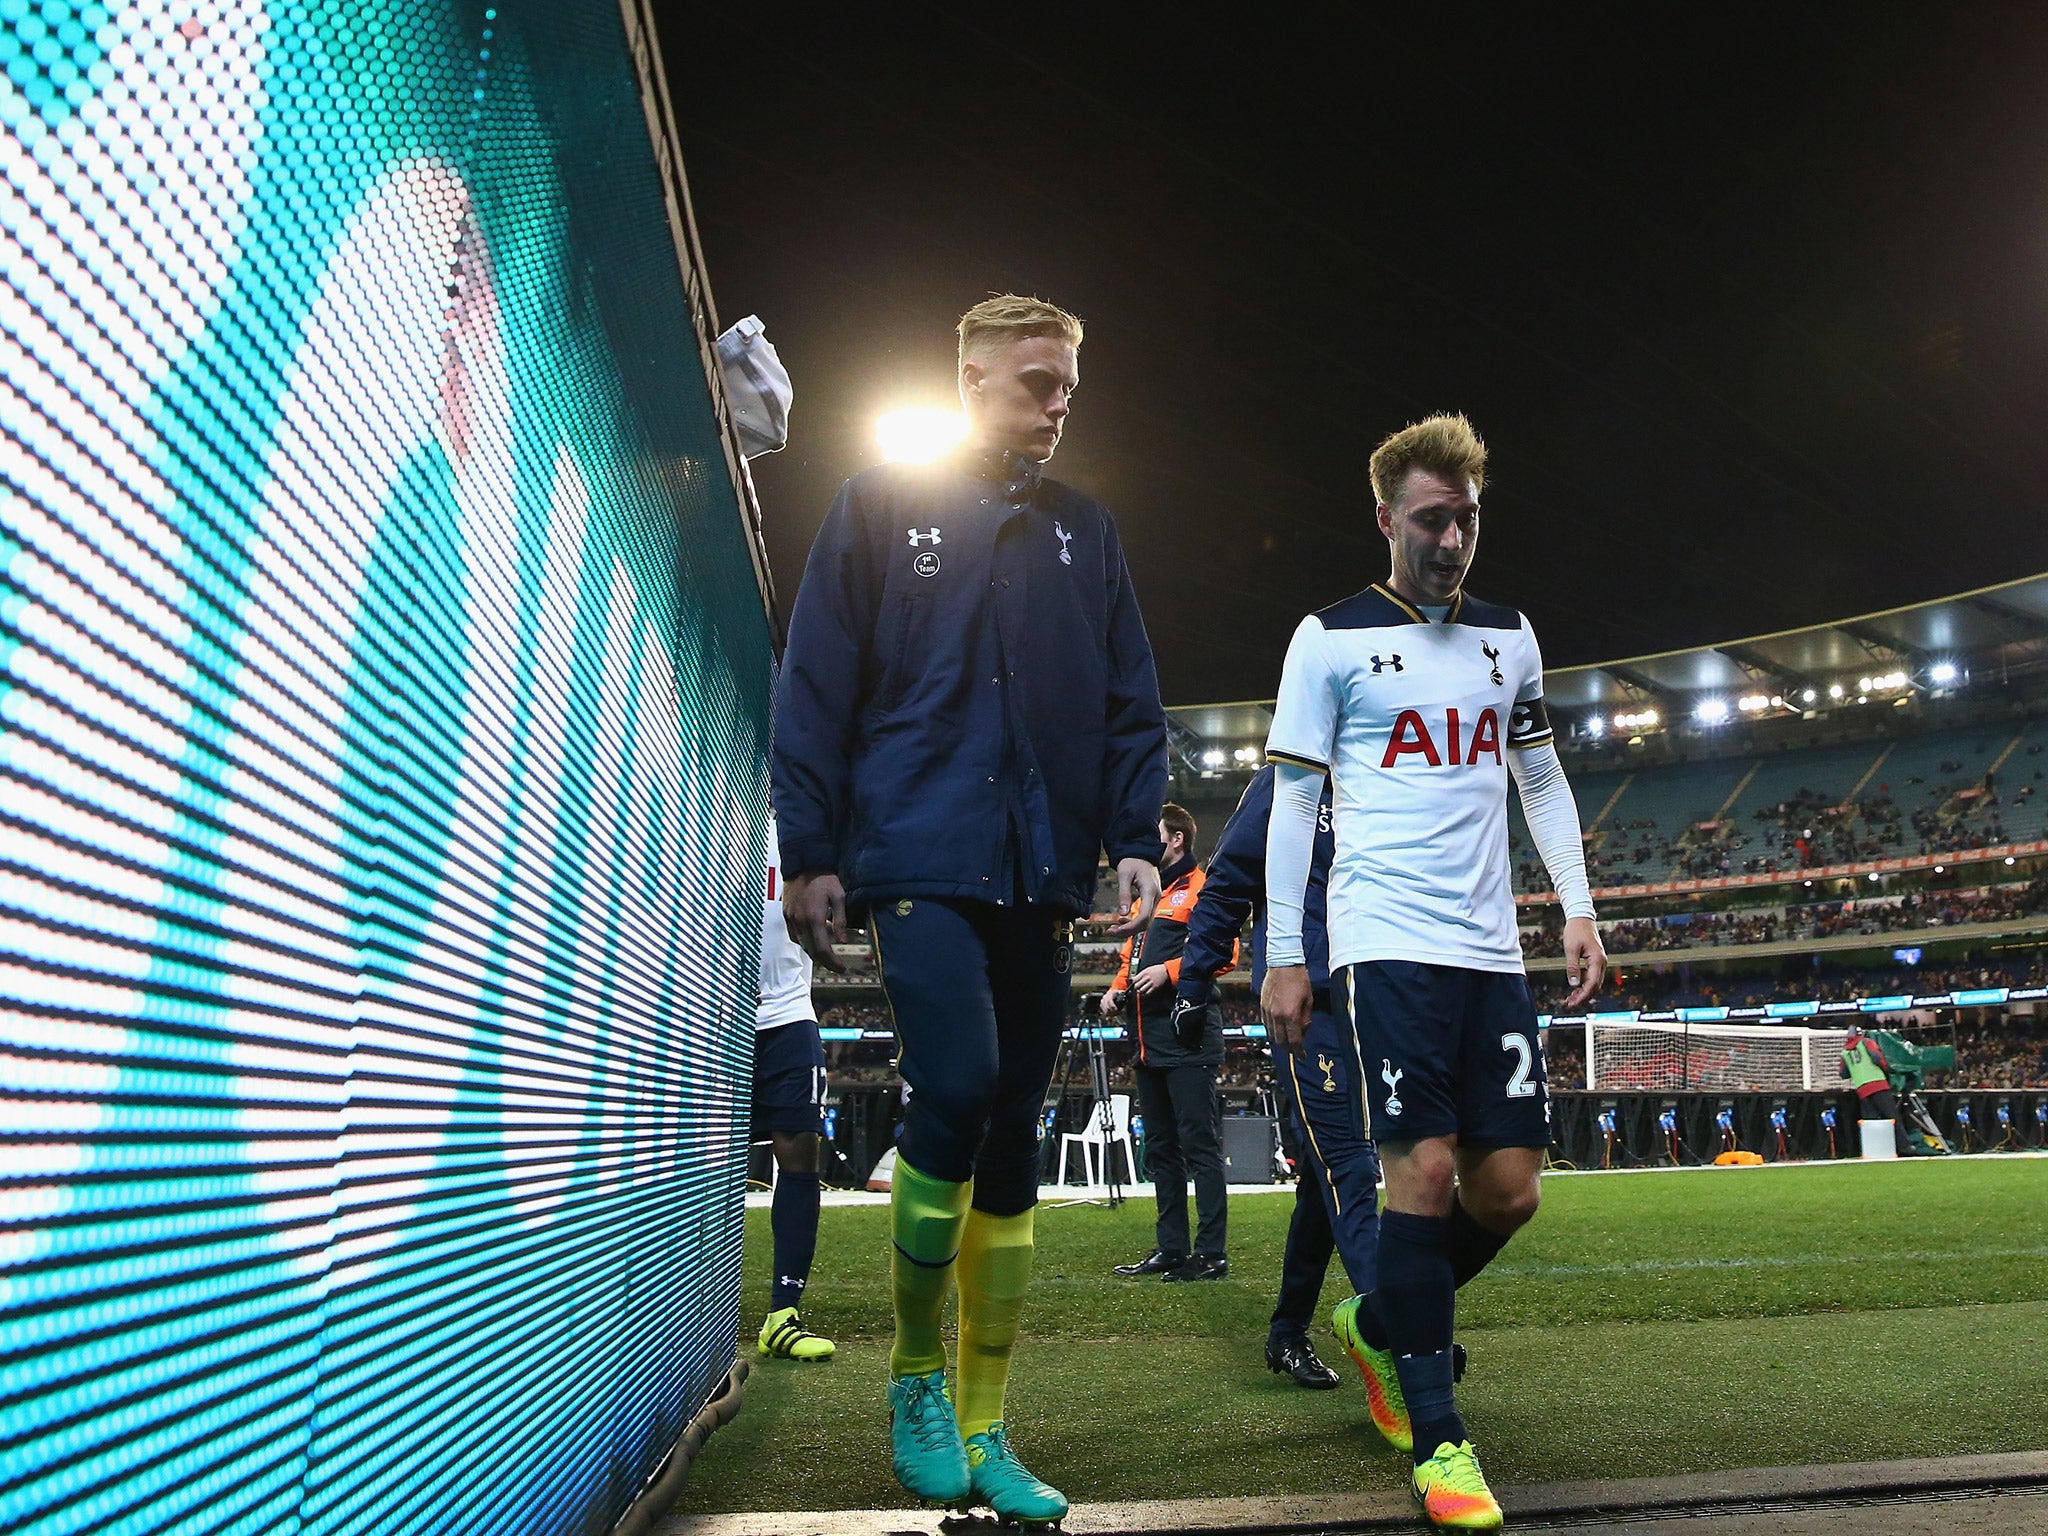 Christian Eriksen has rejected a contract extension from Tottenham